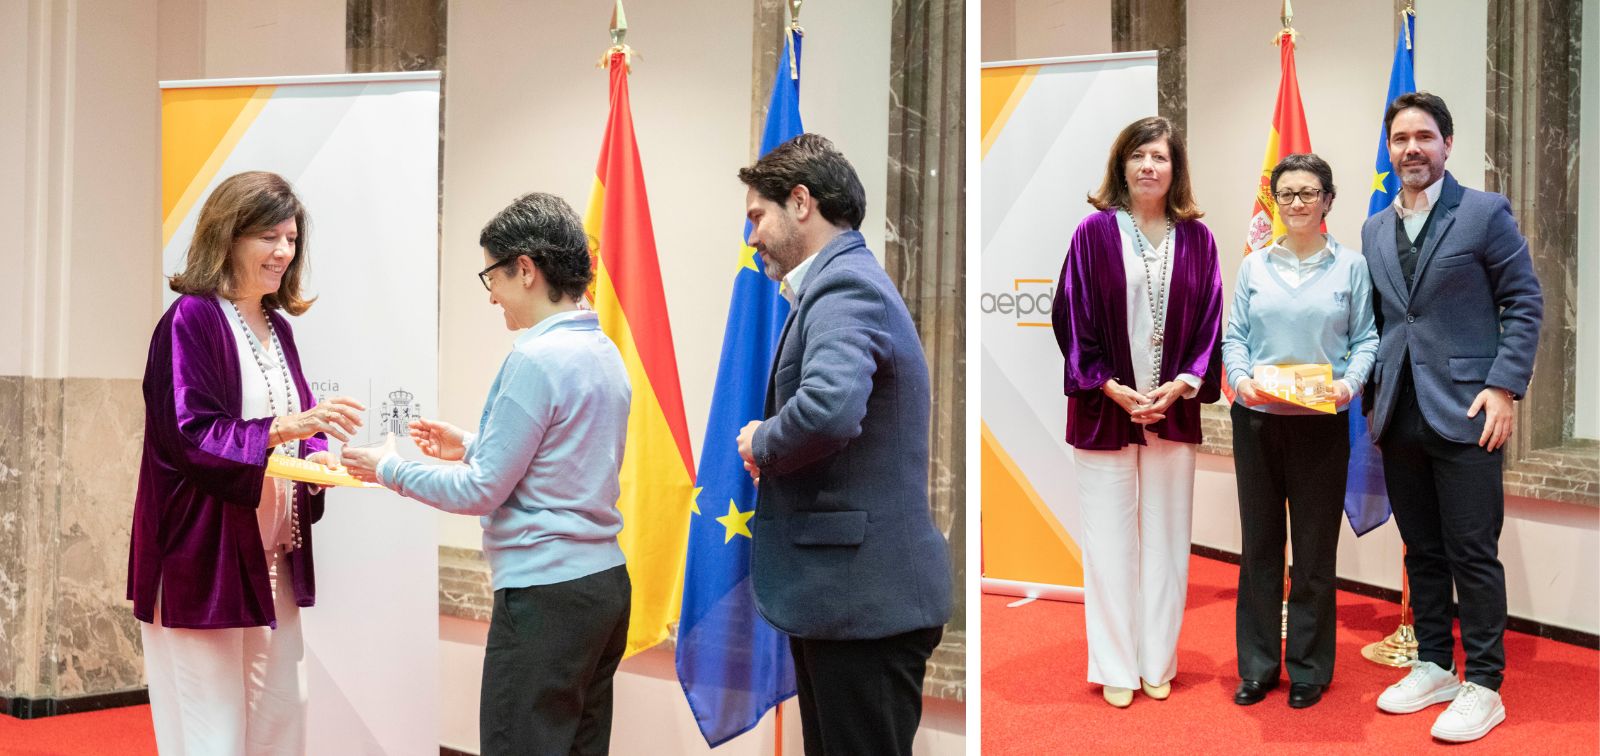 Mar España, the director of the Spanish Data Protection Agency (AEPD), awards the 2023 Data Protection Prize to Joana Porcel and Ramon Cifuentes, who receive it on behalf of ISGlobal